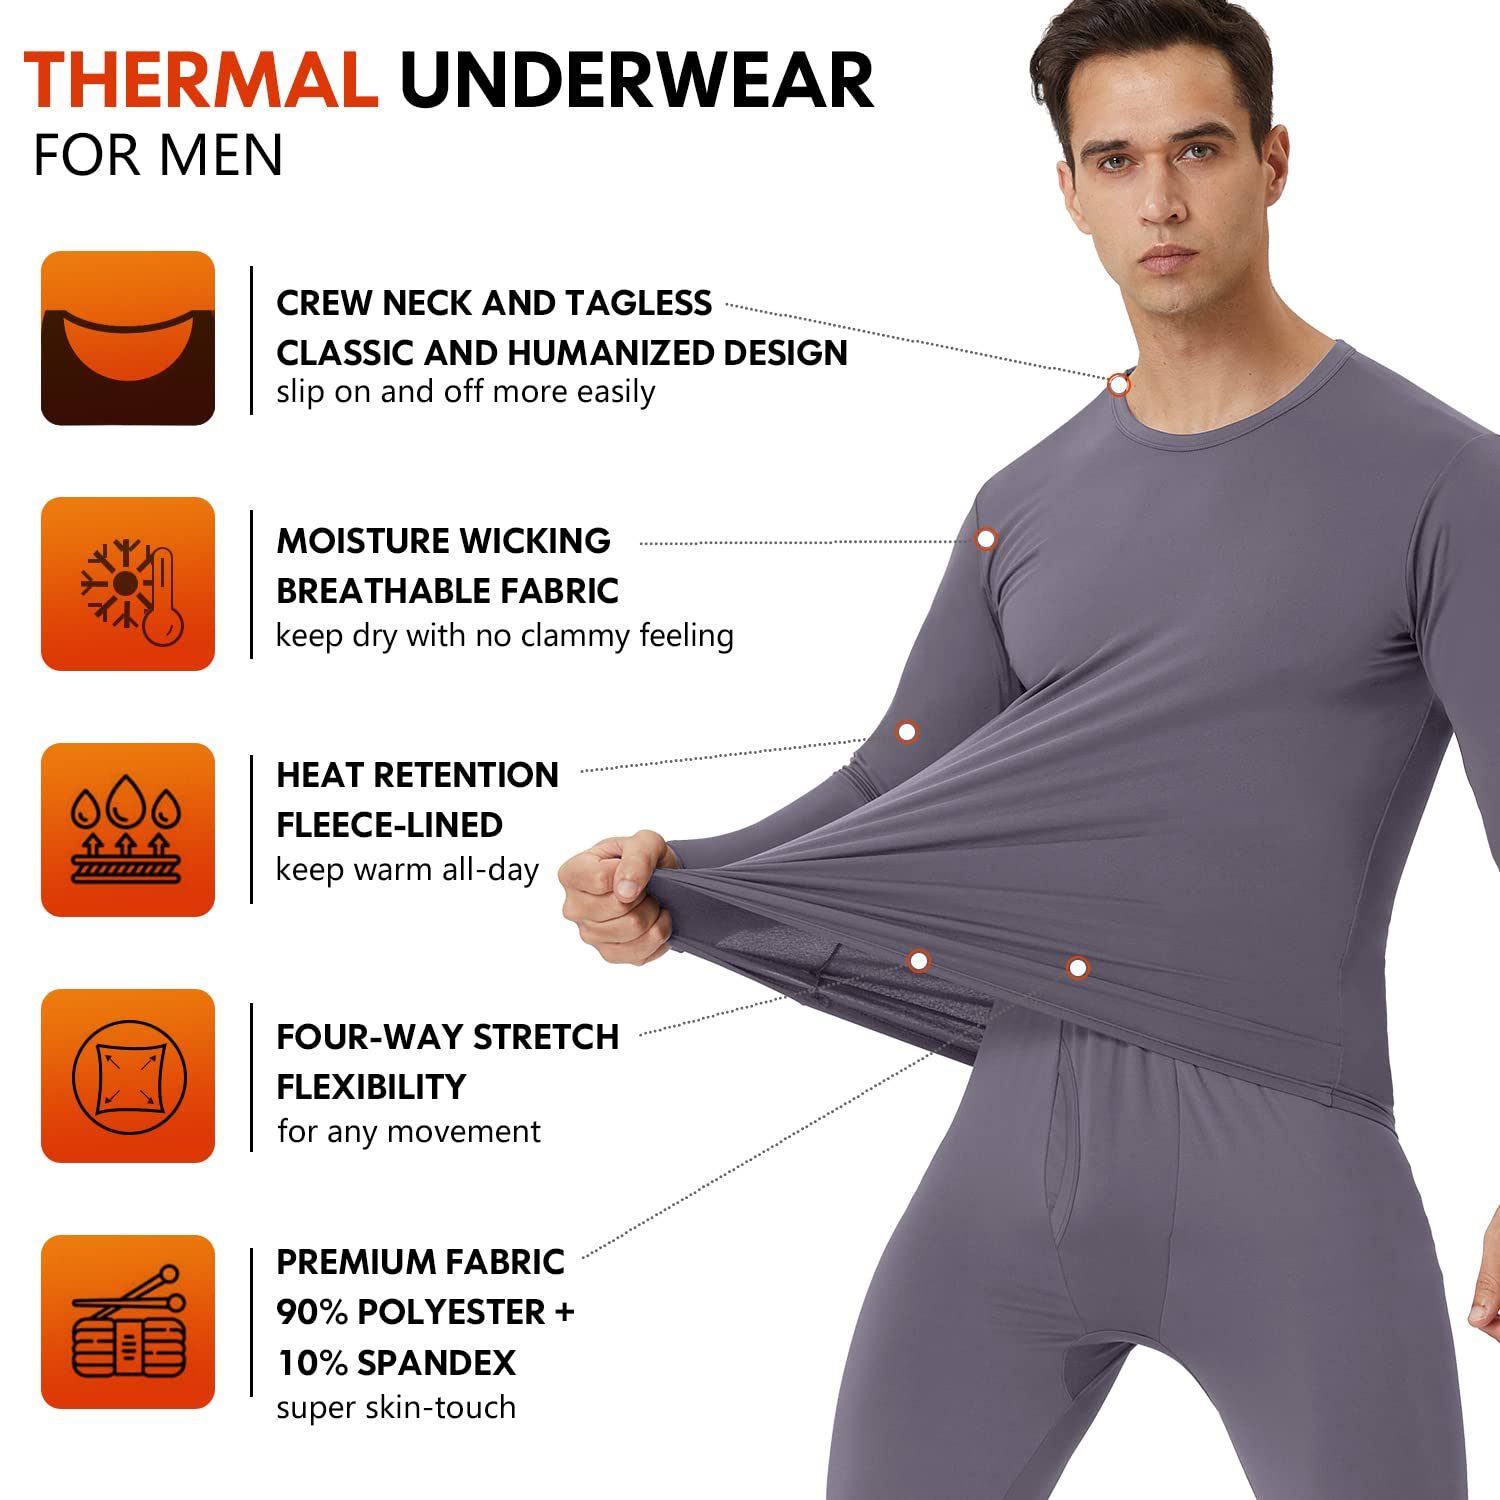 CL Men's Thermal Underwear Long Johns - 2 Pack Soft and Warm Long Underwear Base layer for Cold Weather